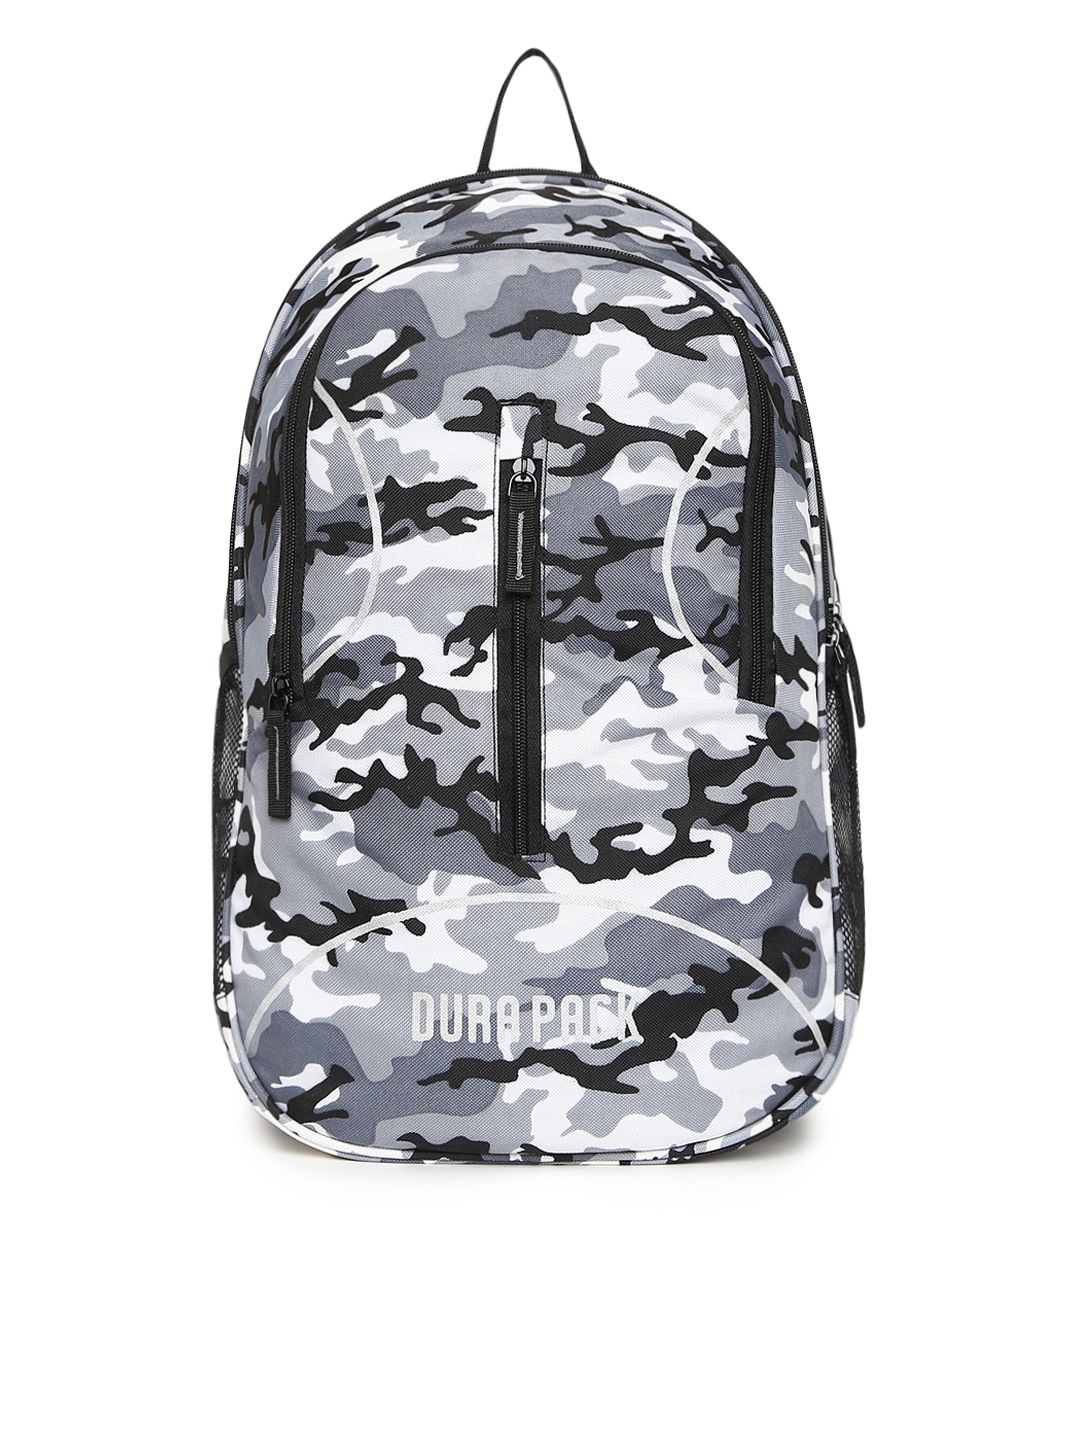 Durapack Unisex Grey & White Camouflage Print 15-Inch Laptop Backpack Price in India